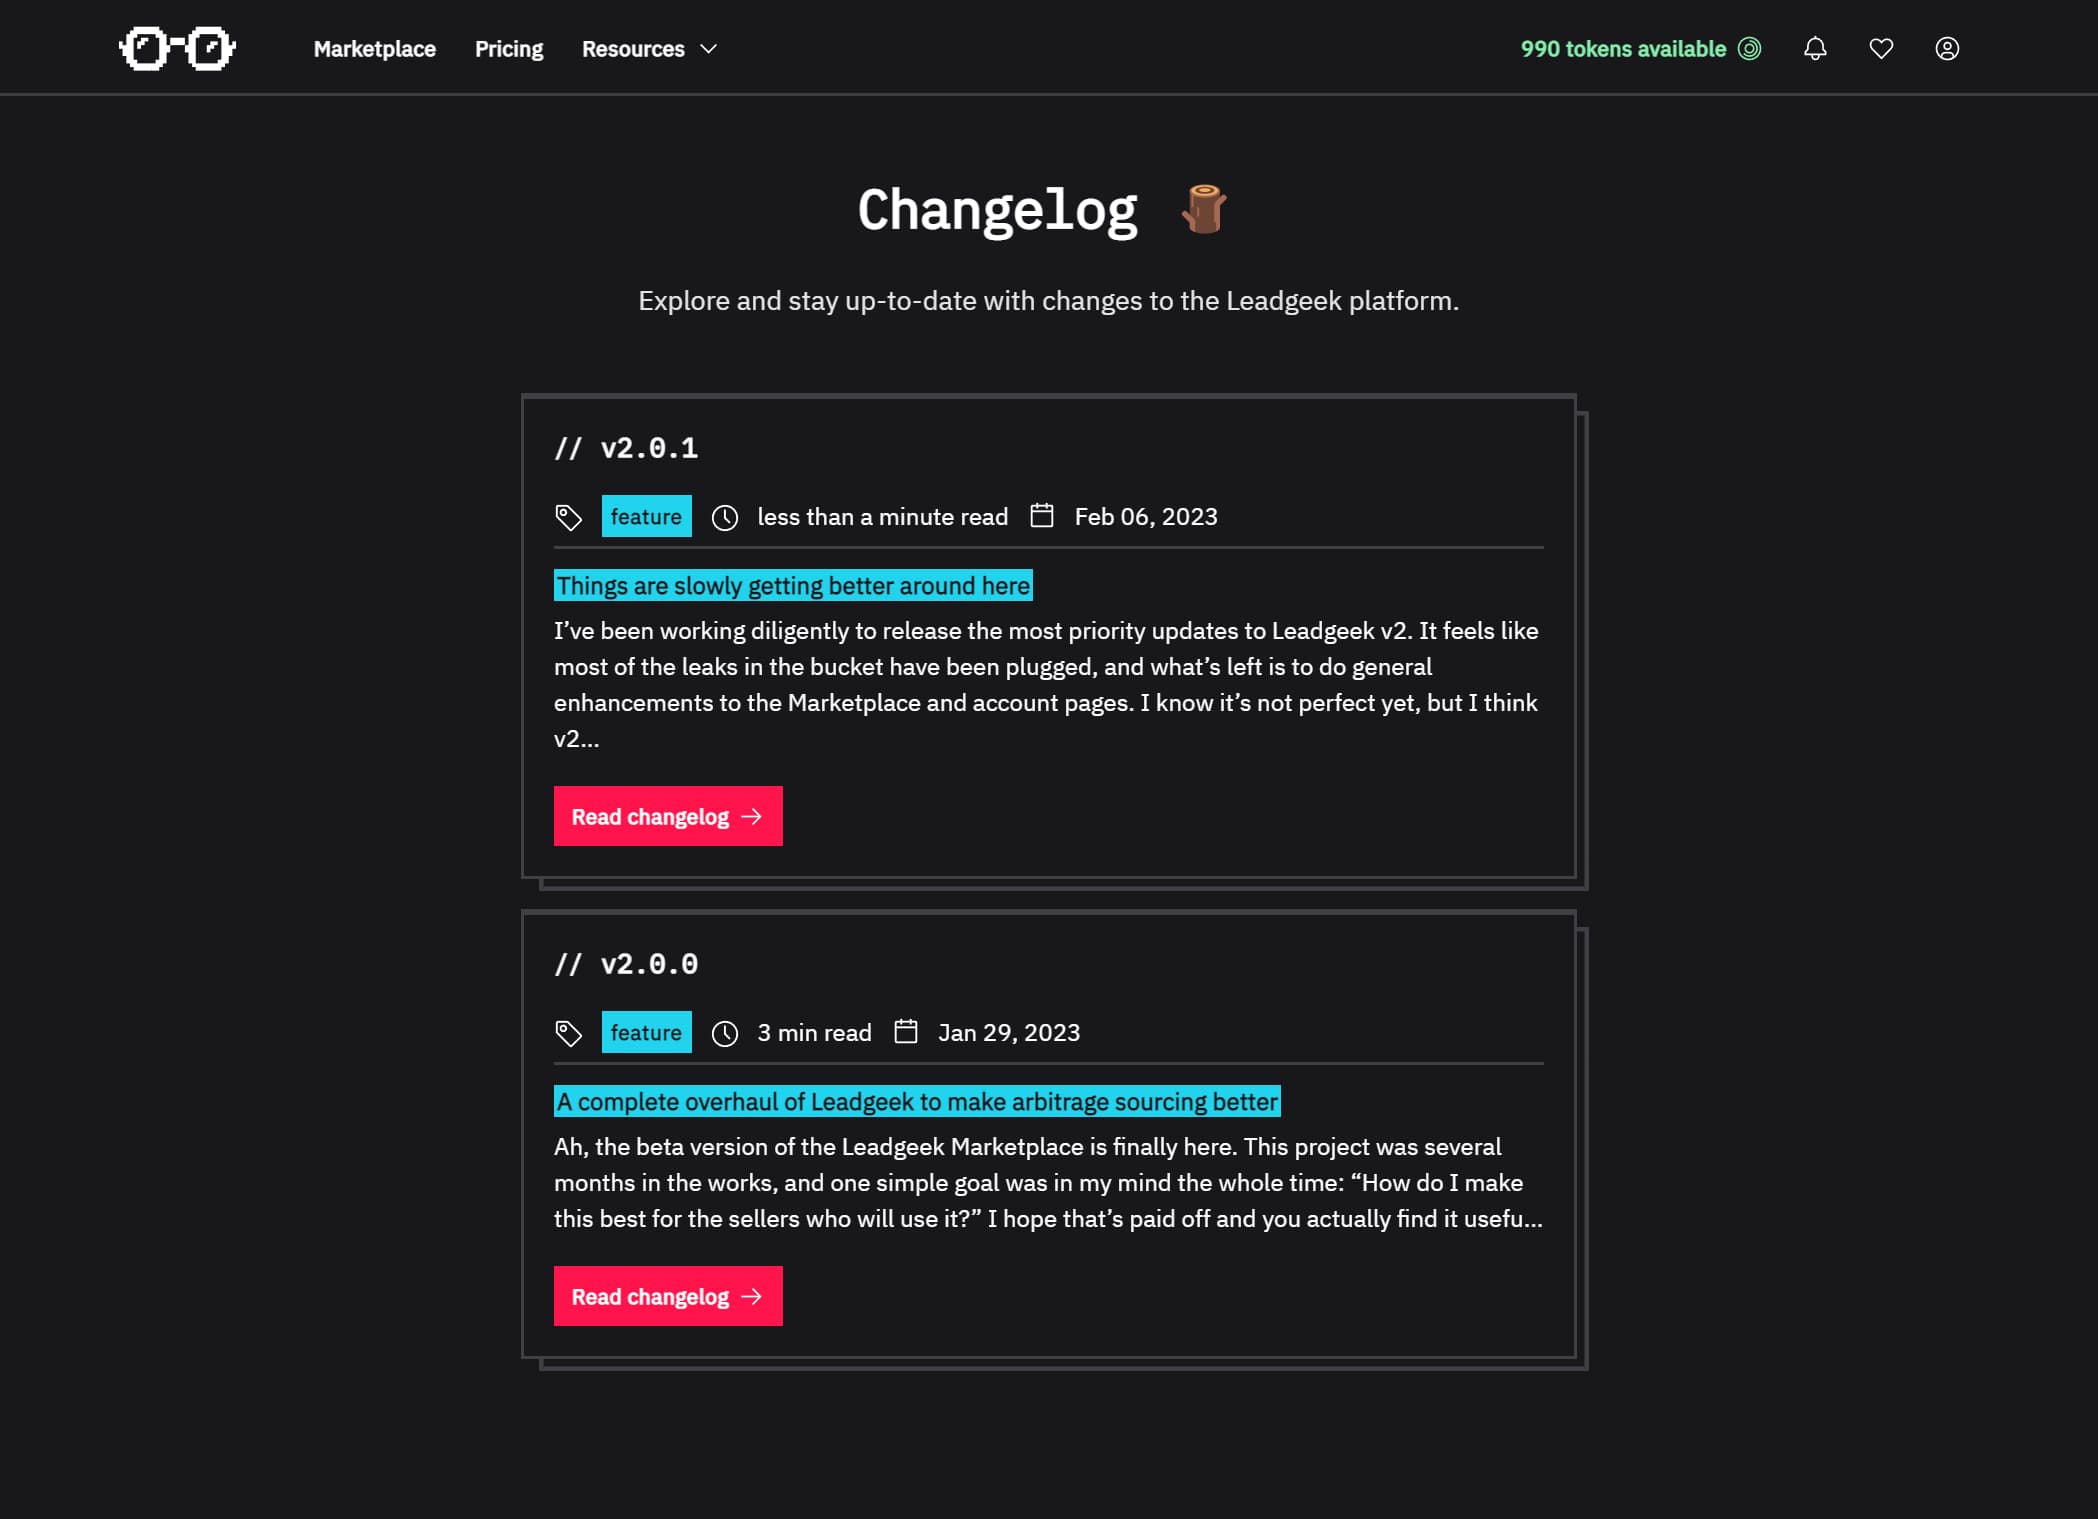 The changelog page